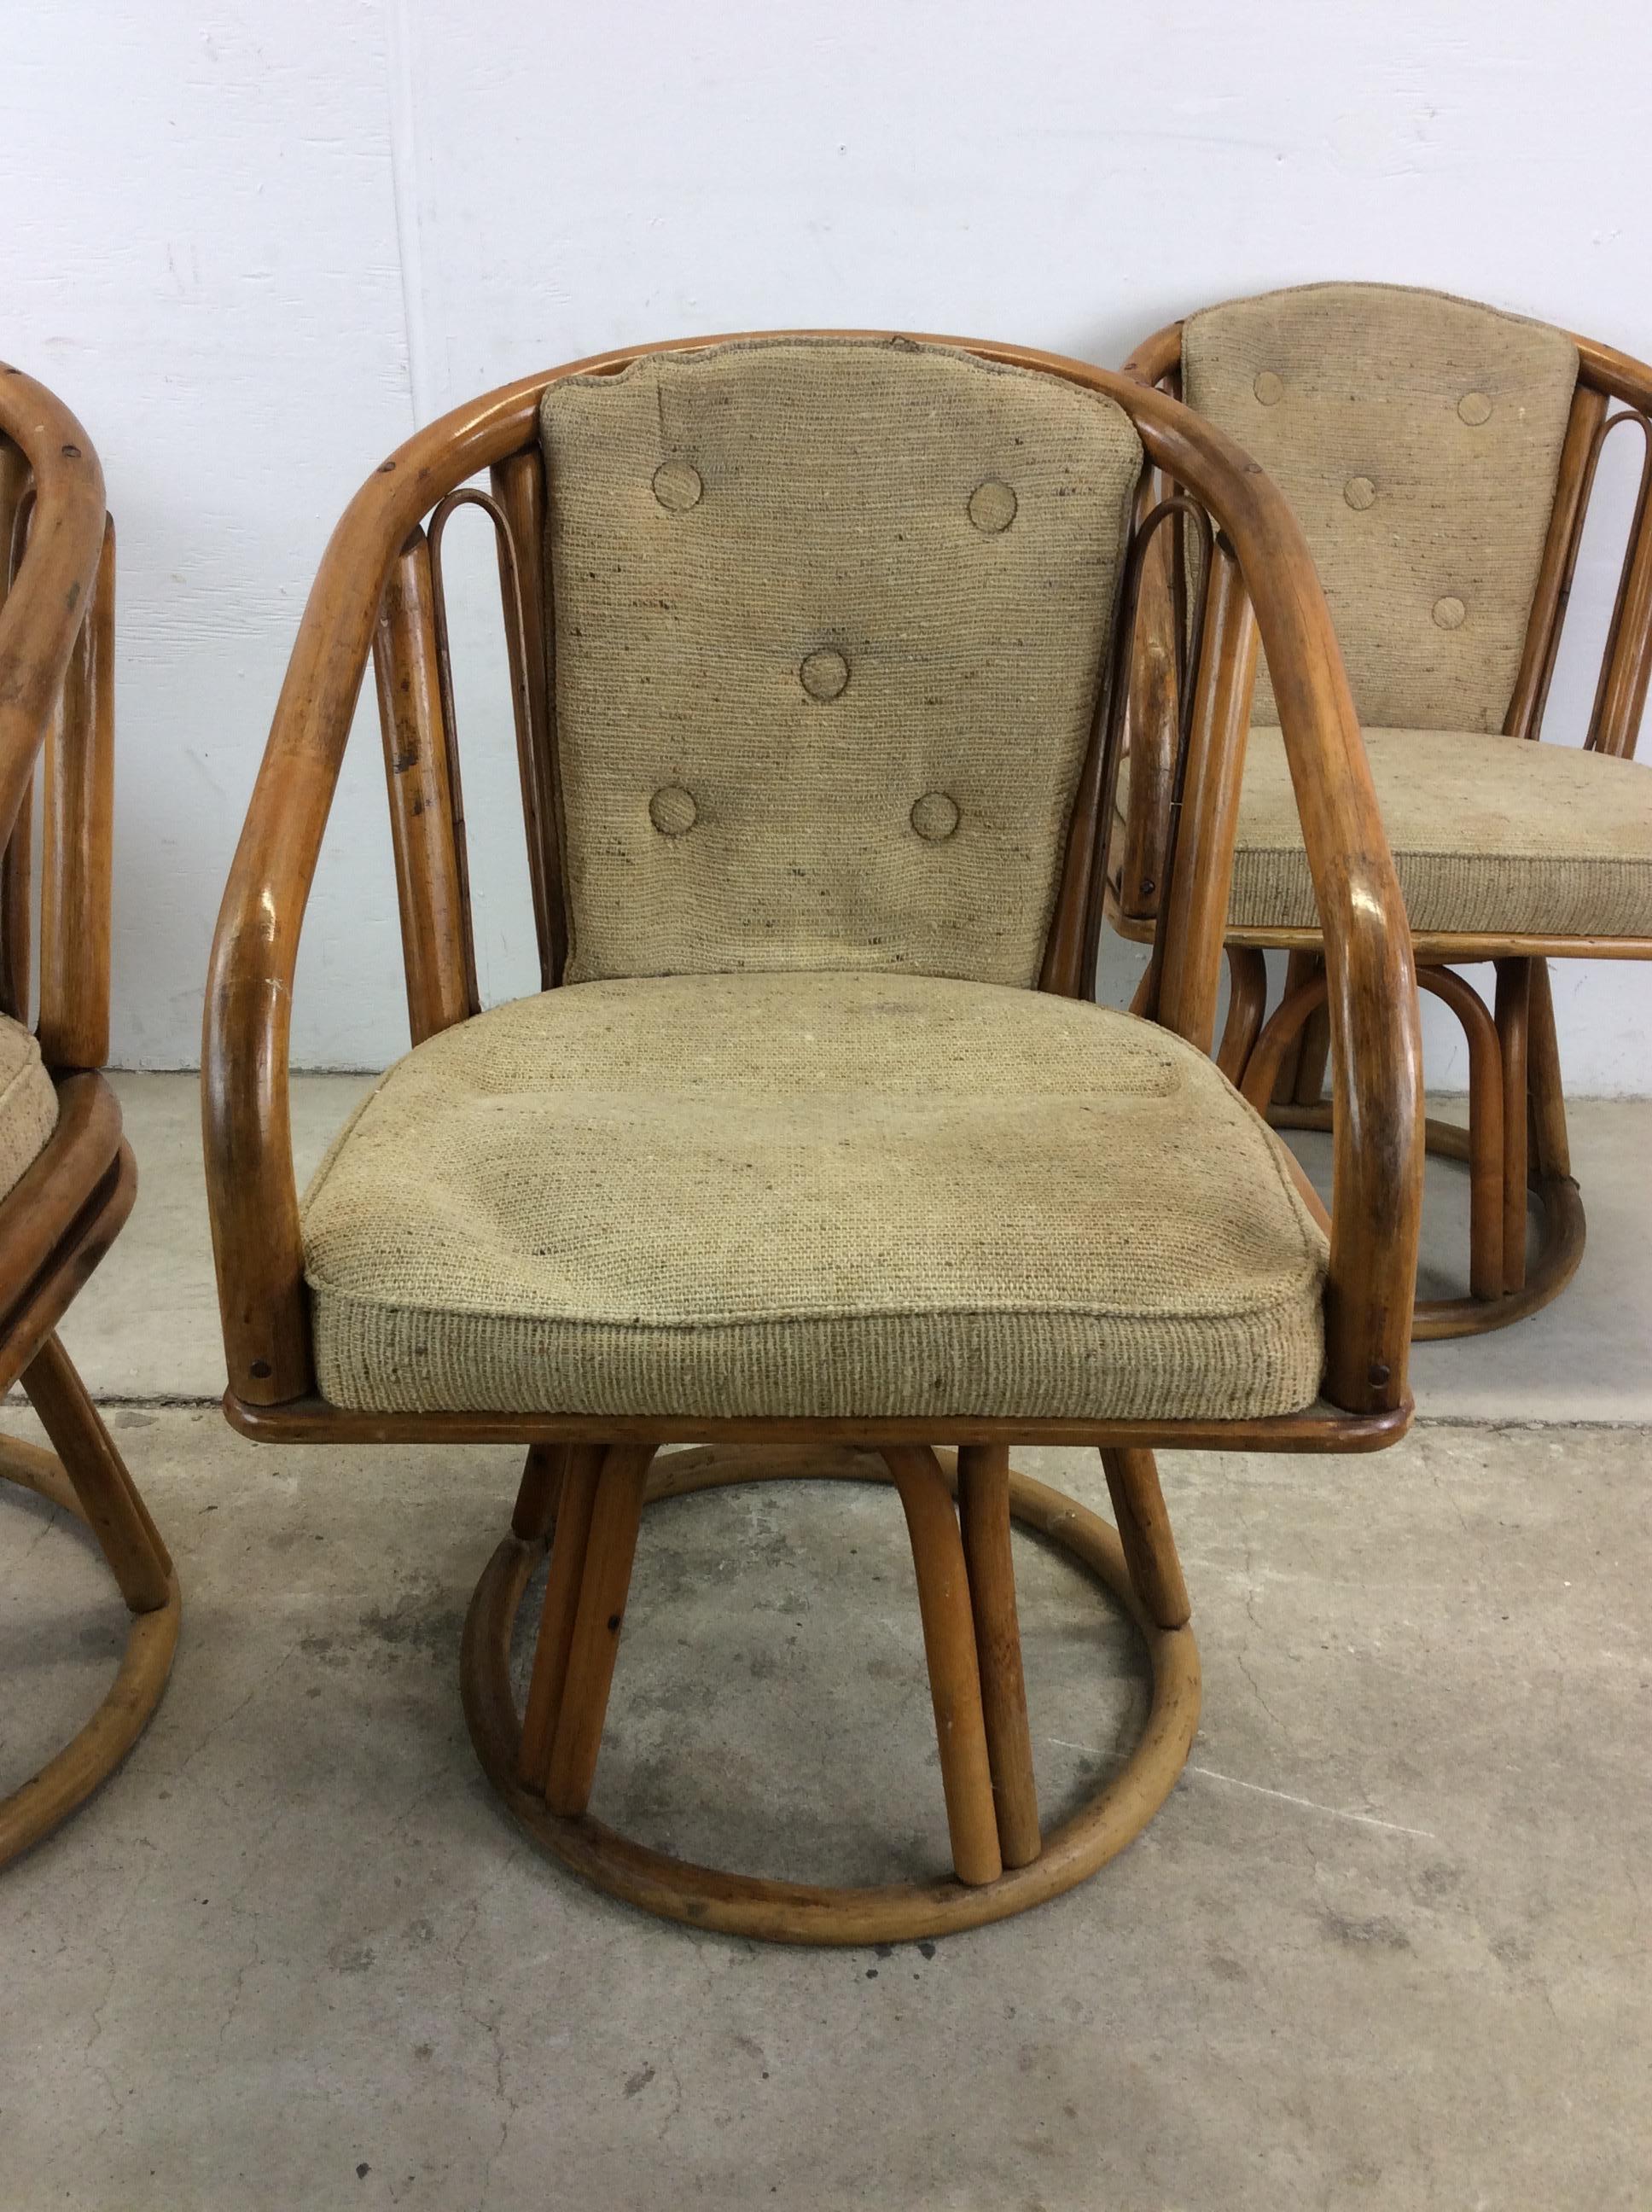 Set of 4 Vintage Rattan Chairs with Swivel Base In Fair Condition For Sale In Freehold, NJ